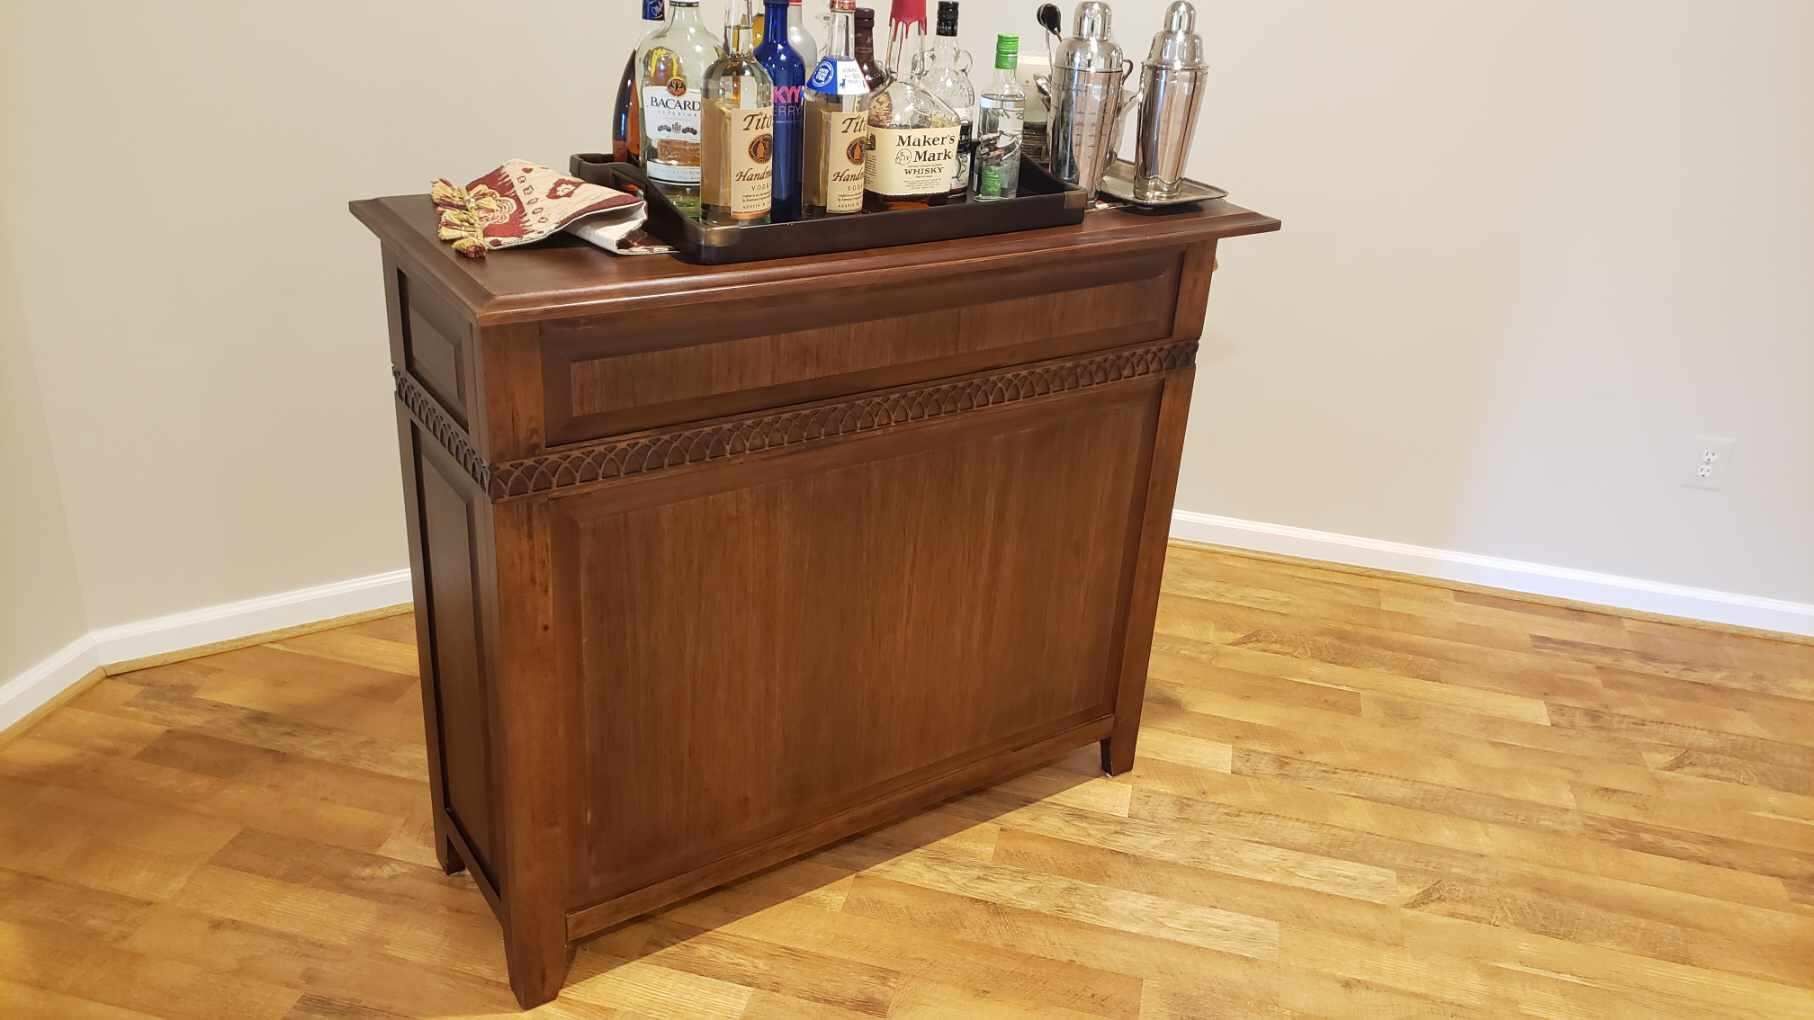 Solid wood bar and wine rack